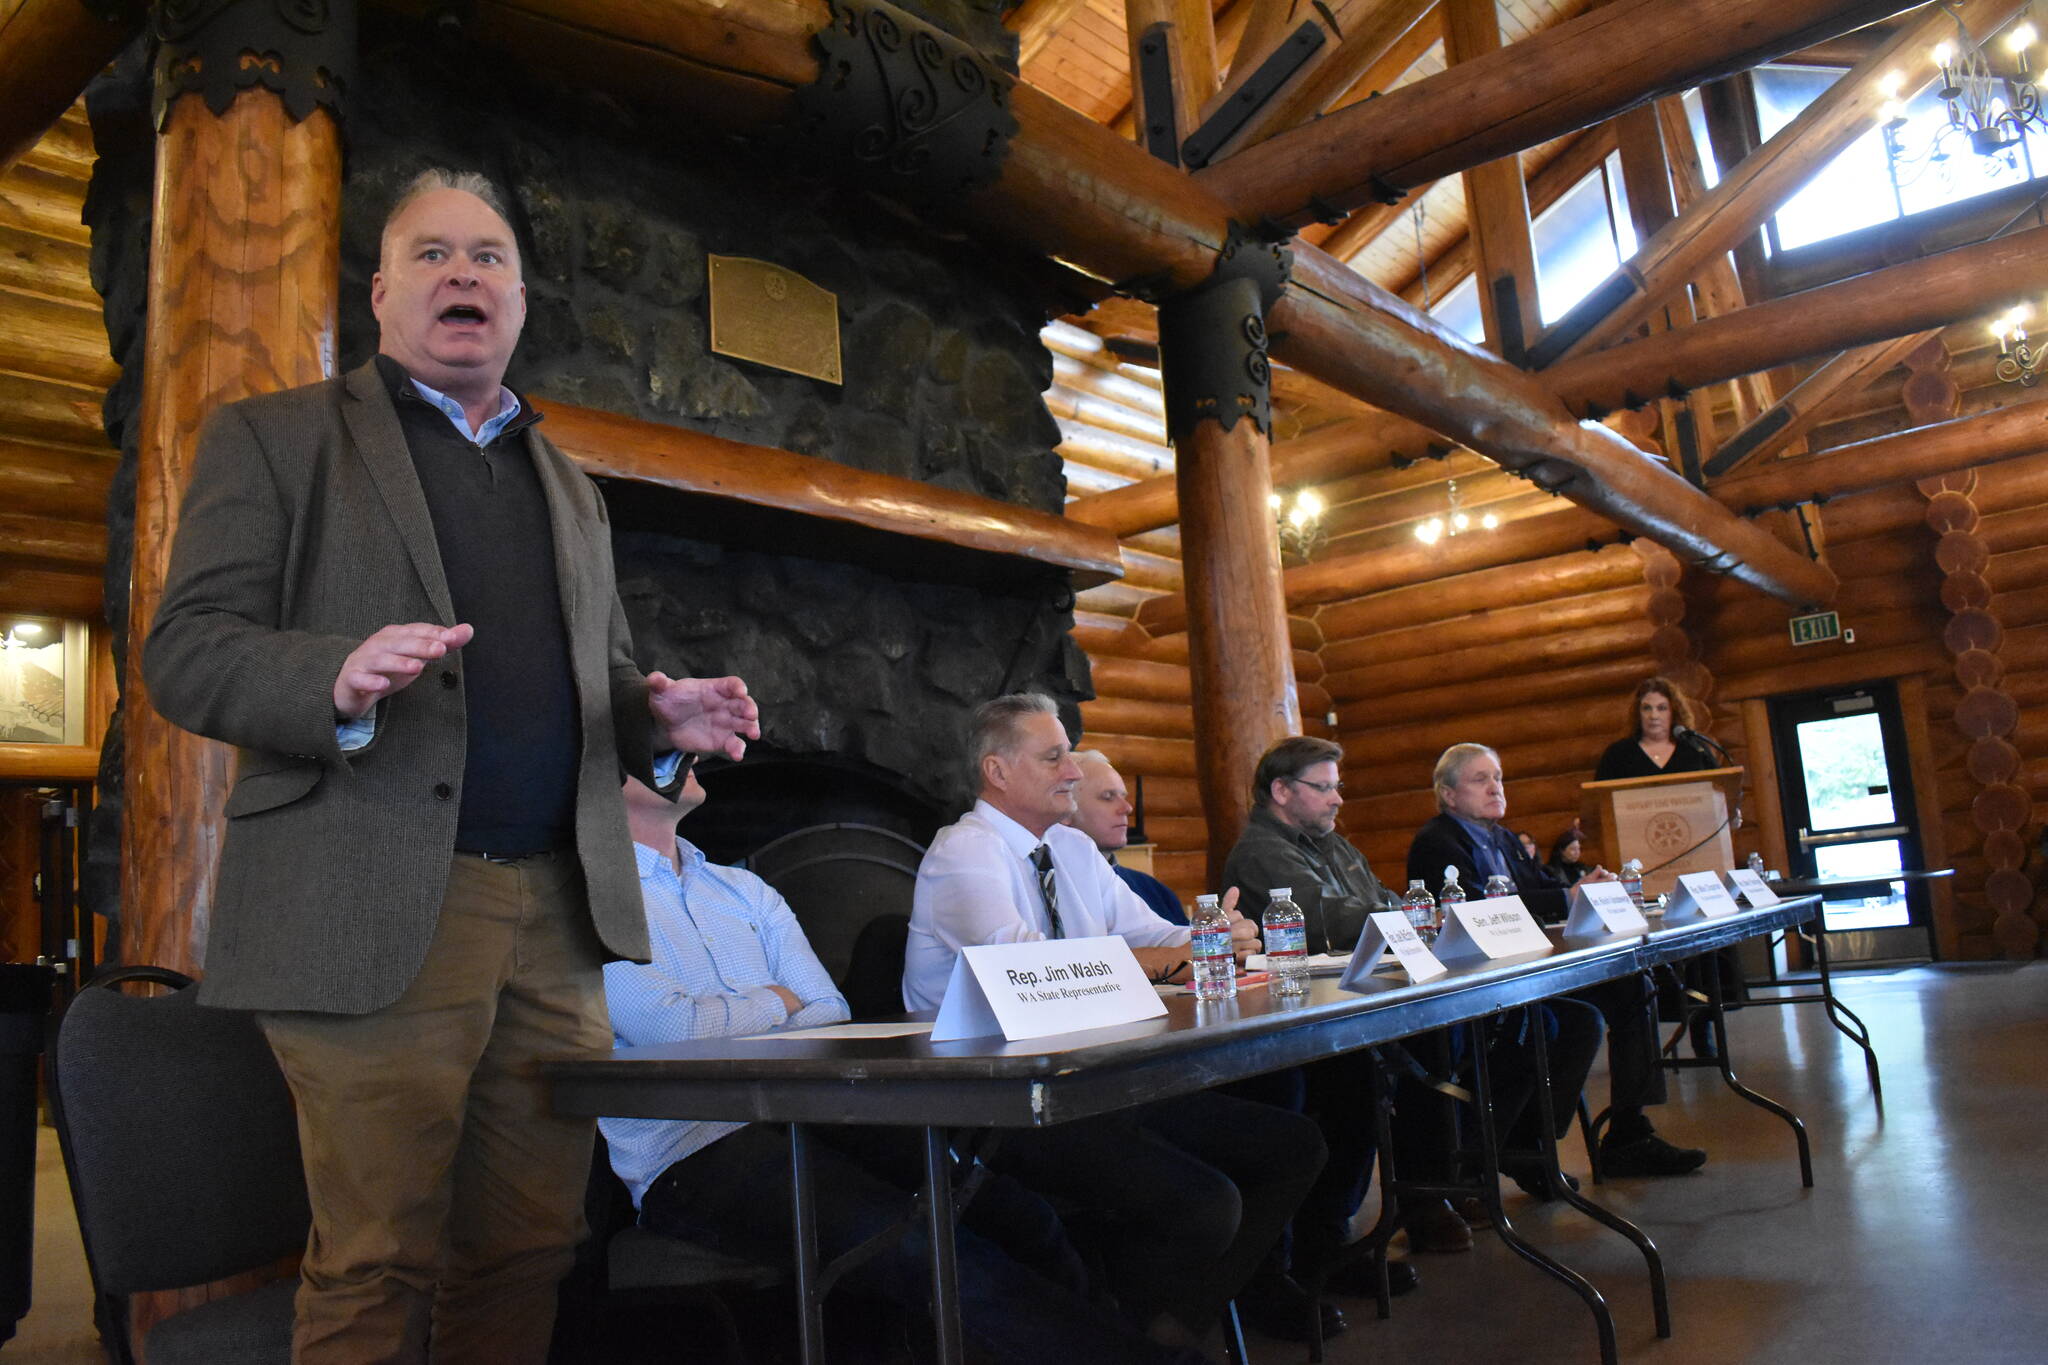 Rep. Jim Walsh, R-Aberdeen, left, speaks during a legislative "send-off" event hosted by Greater Grays Harbor, Inc on Friday, Jan. 5. All six state legislators from the 19th and 24th districts were in attendance. (Clayton Franke / The Daily World)